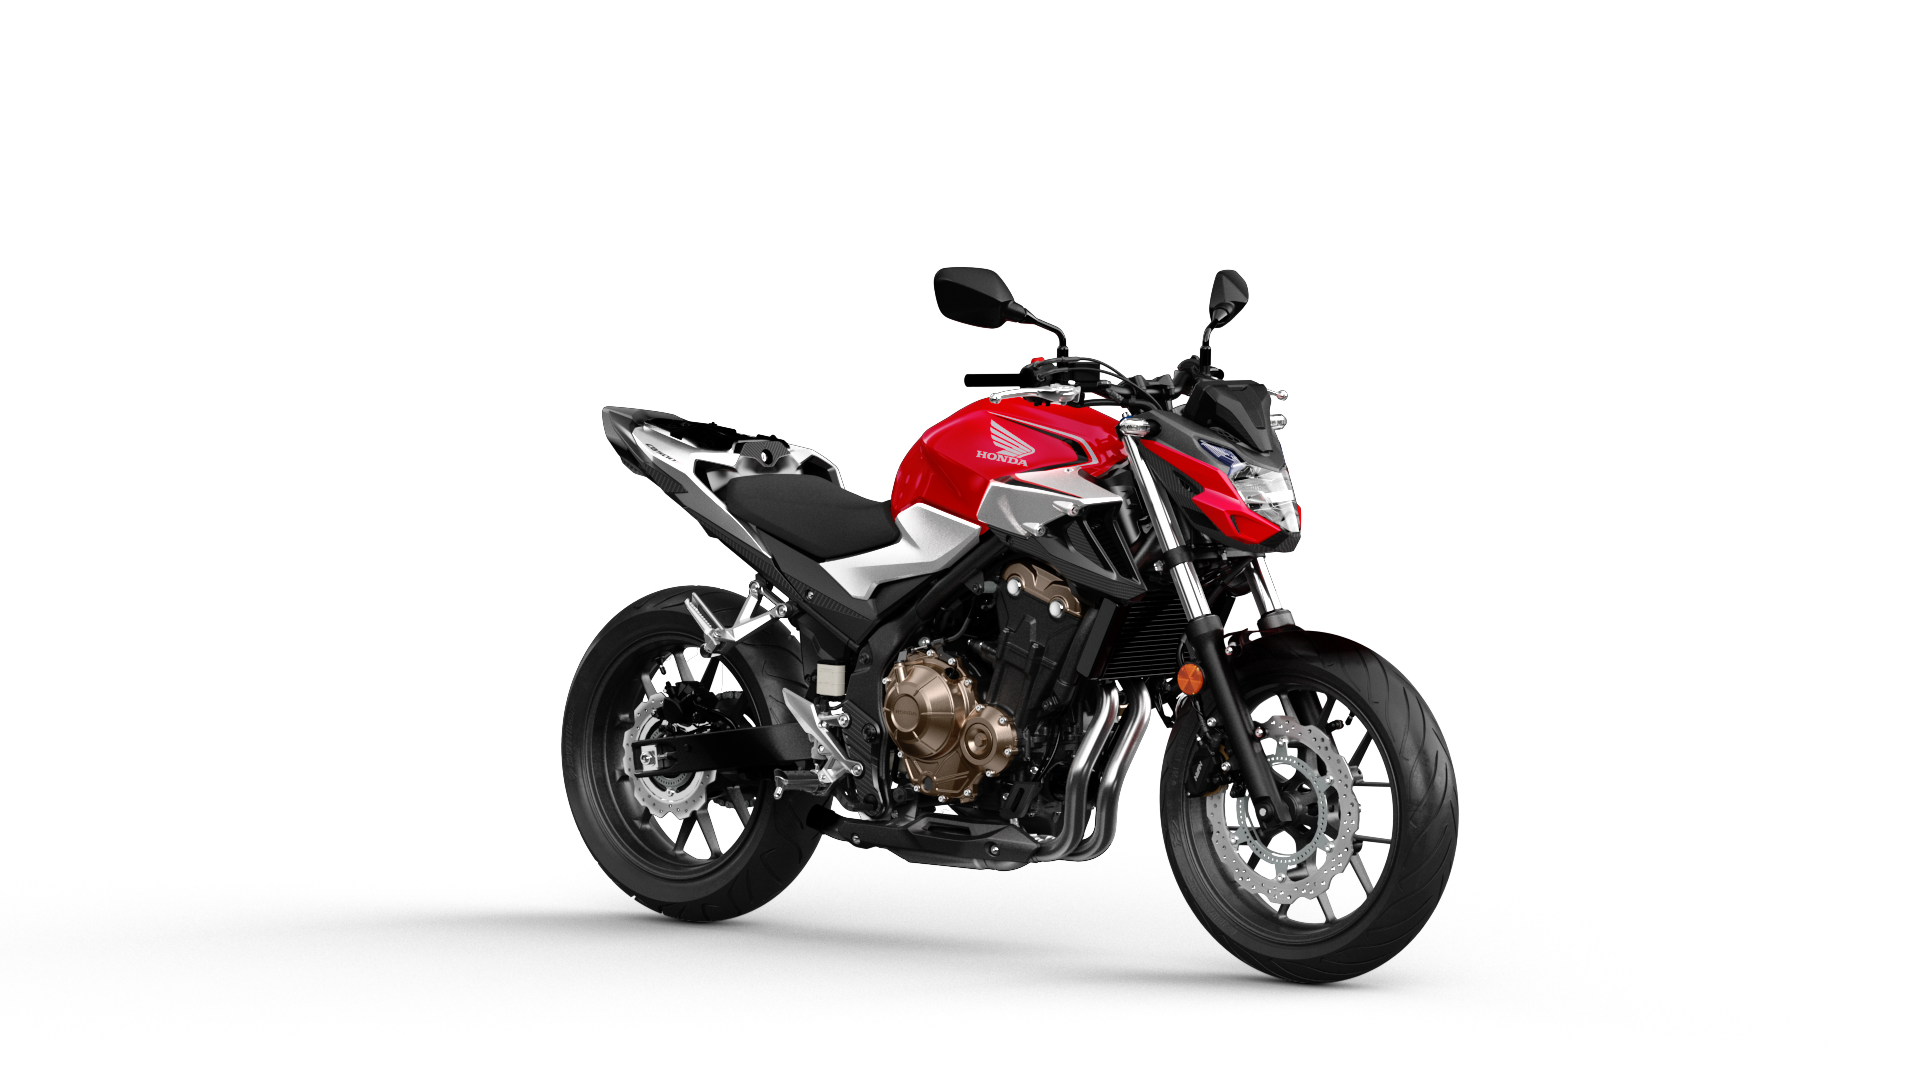 CB500F Technical Specs. Key Features & Pricing